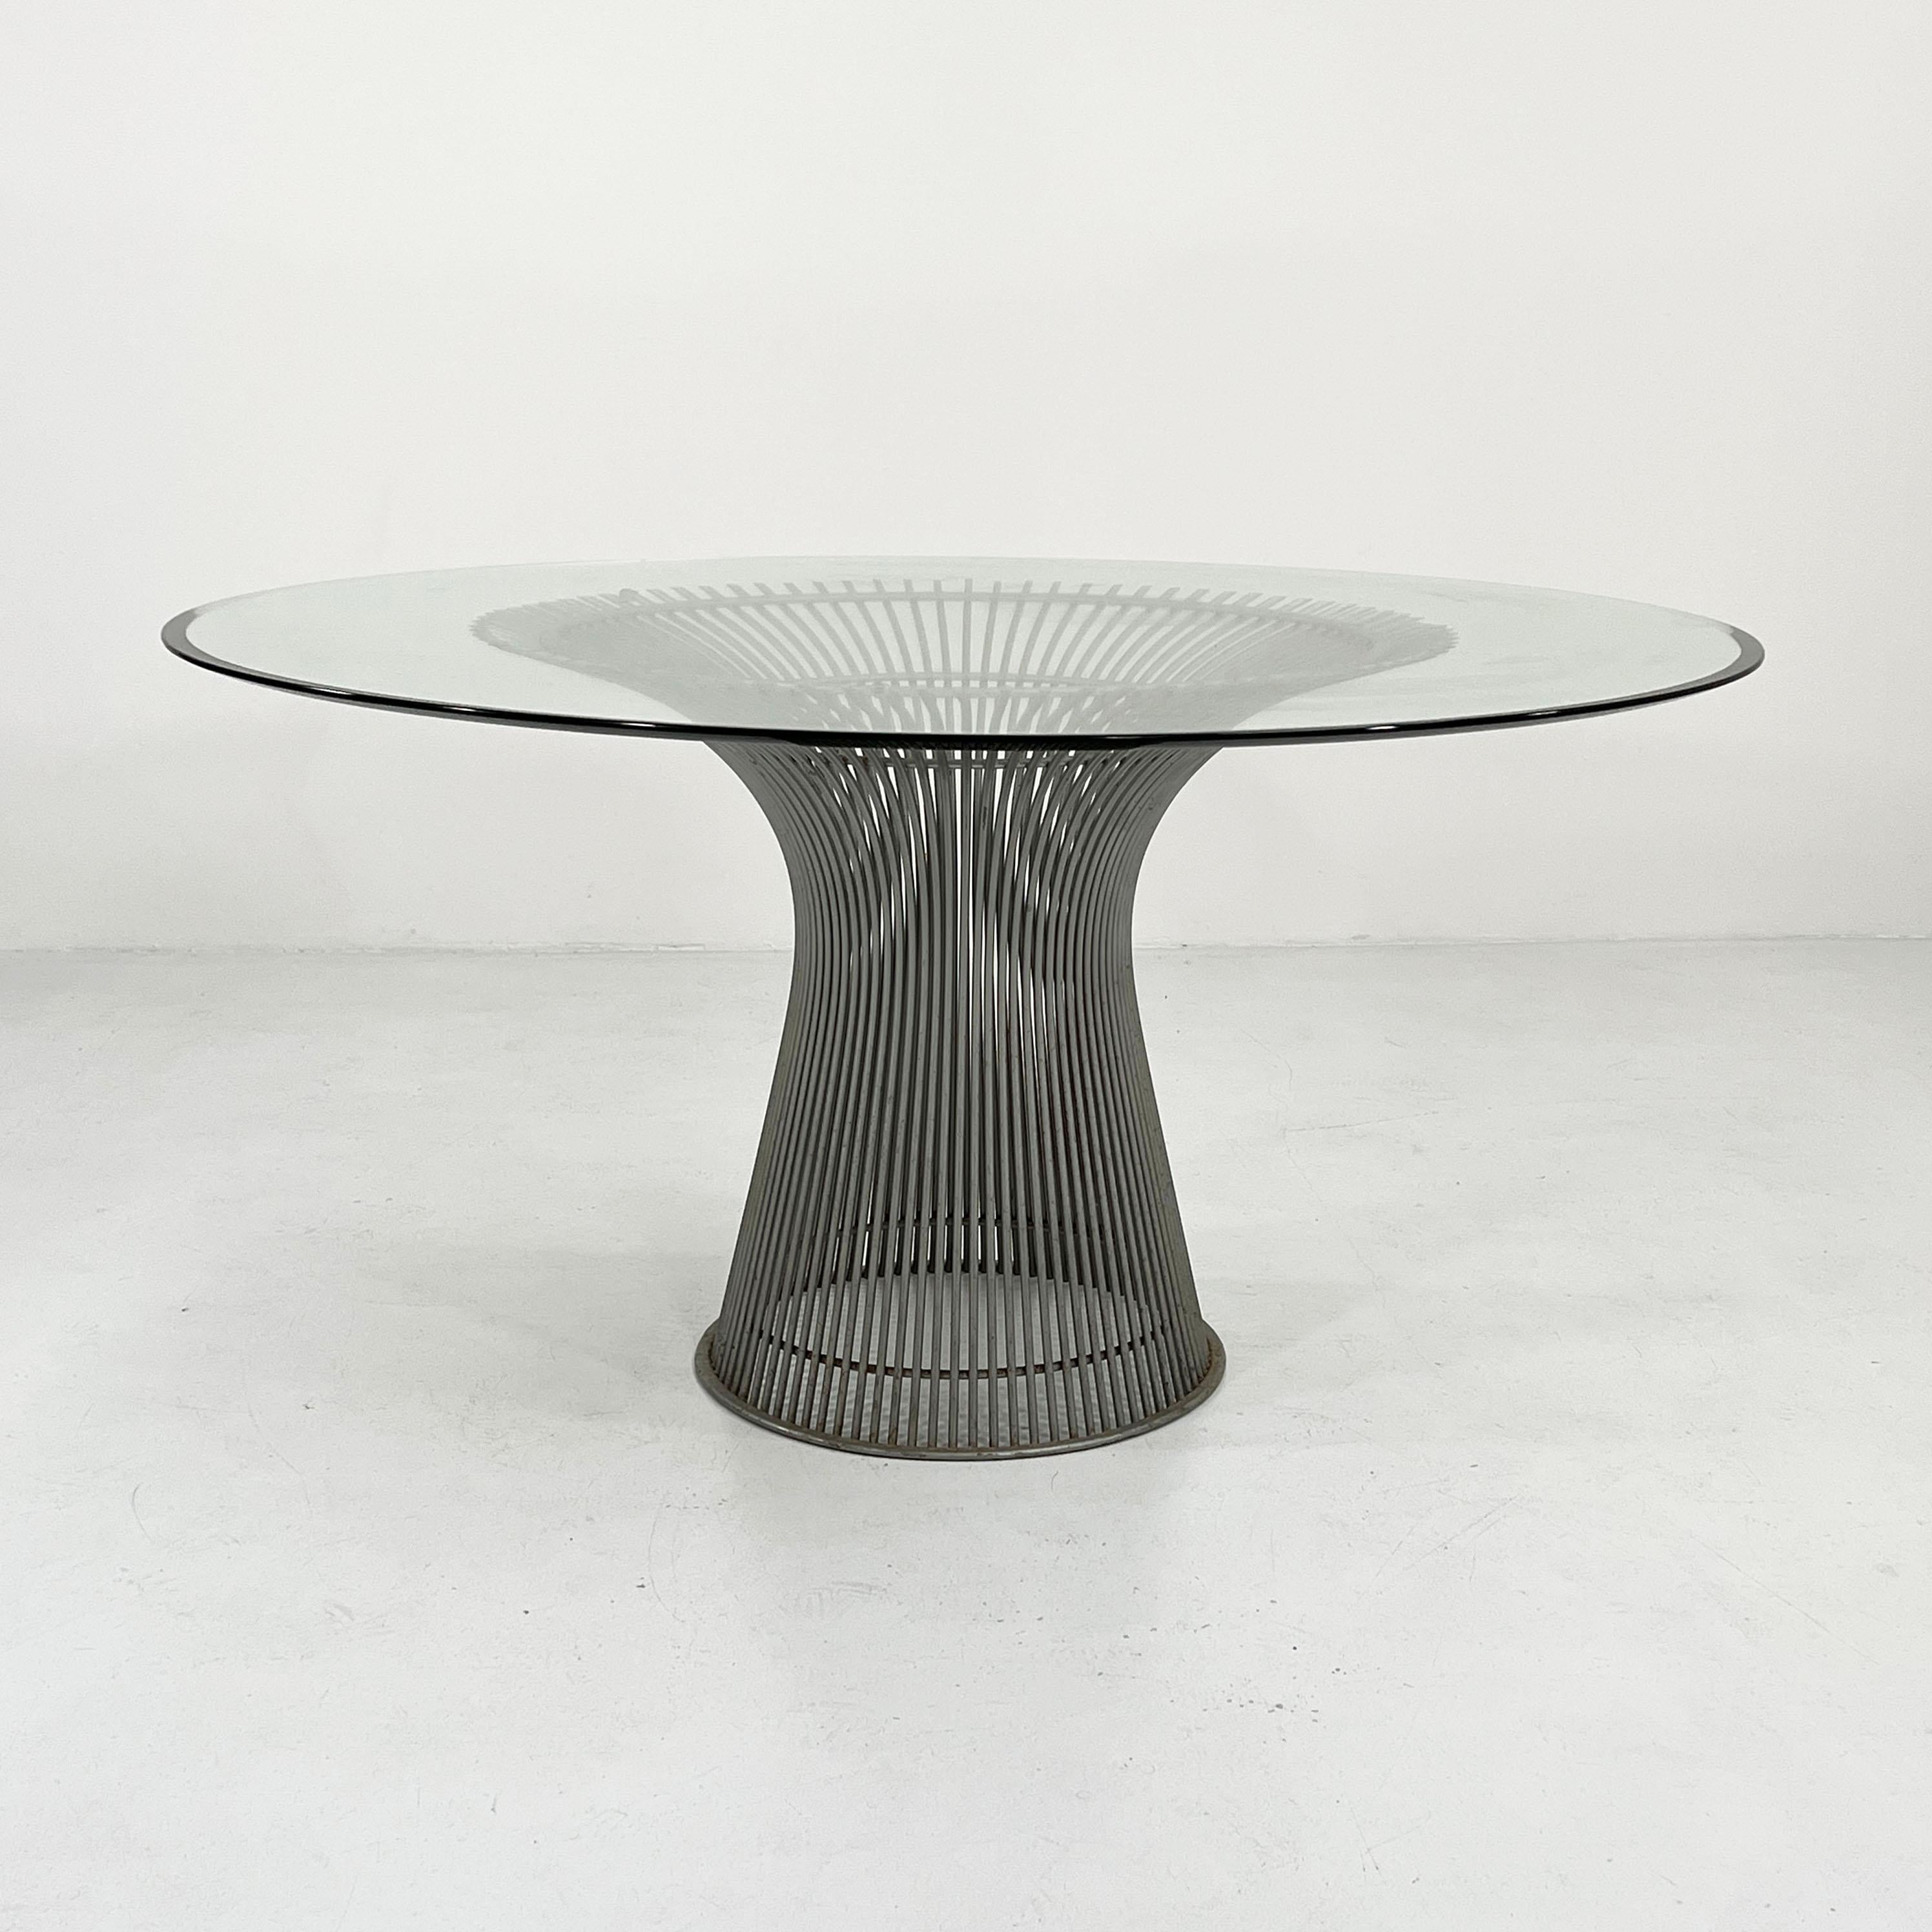 Designer - Warren Platner
Producer - Knoll
Model - Wire Dining Table 
Design Period - Sixties
Measurements - Width 136,5 cm x Depth 136,5 cm x Height 72 cm
Materials - Glass, Steel
Color - Silver, Transparent 
Light wear consistent with age